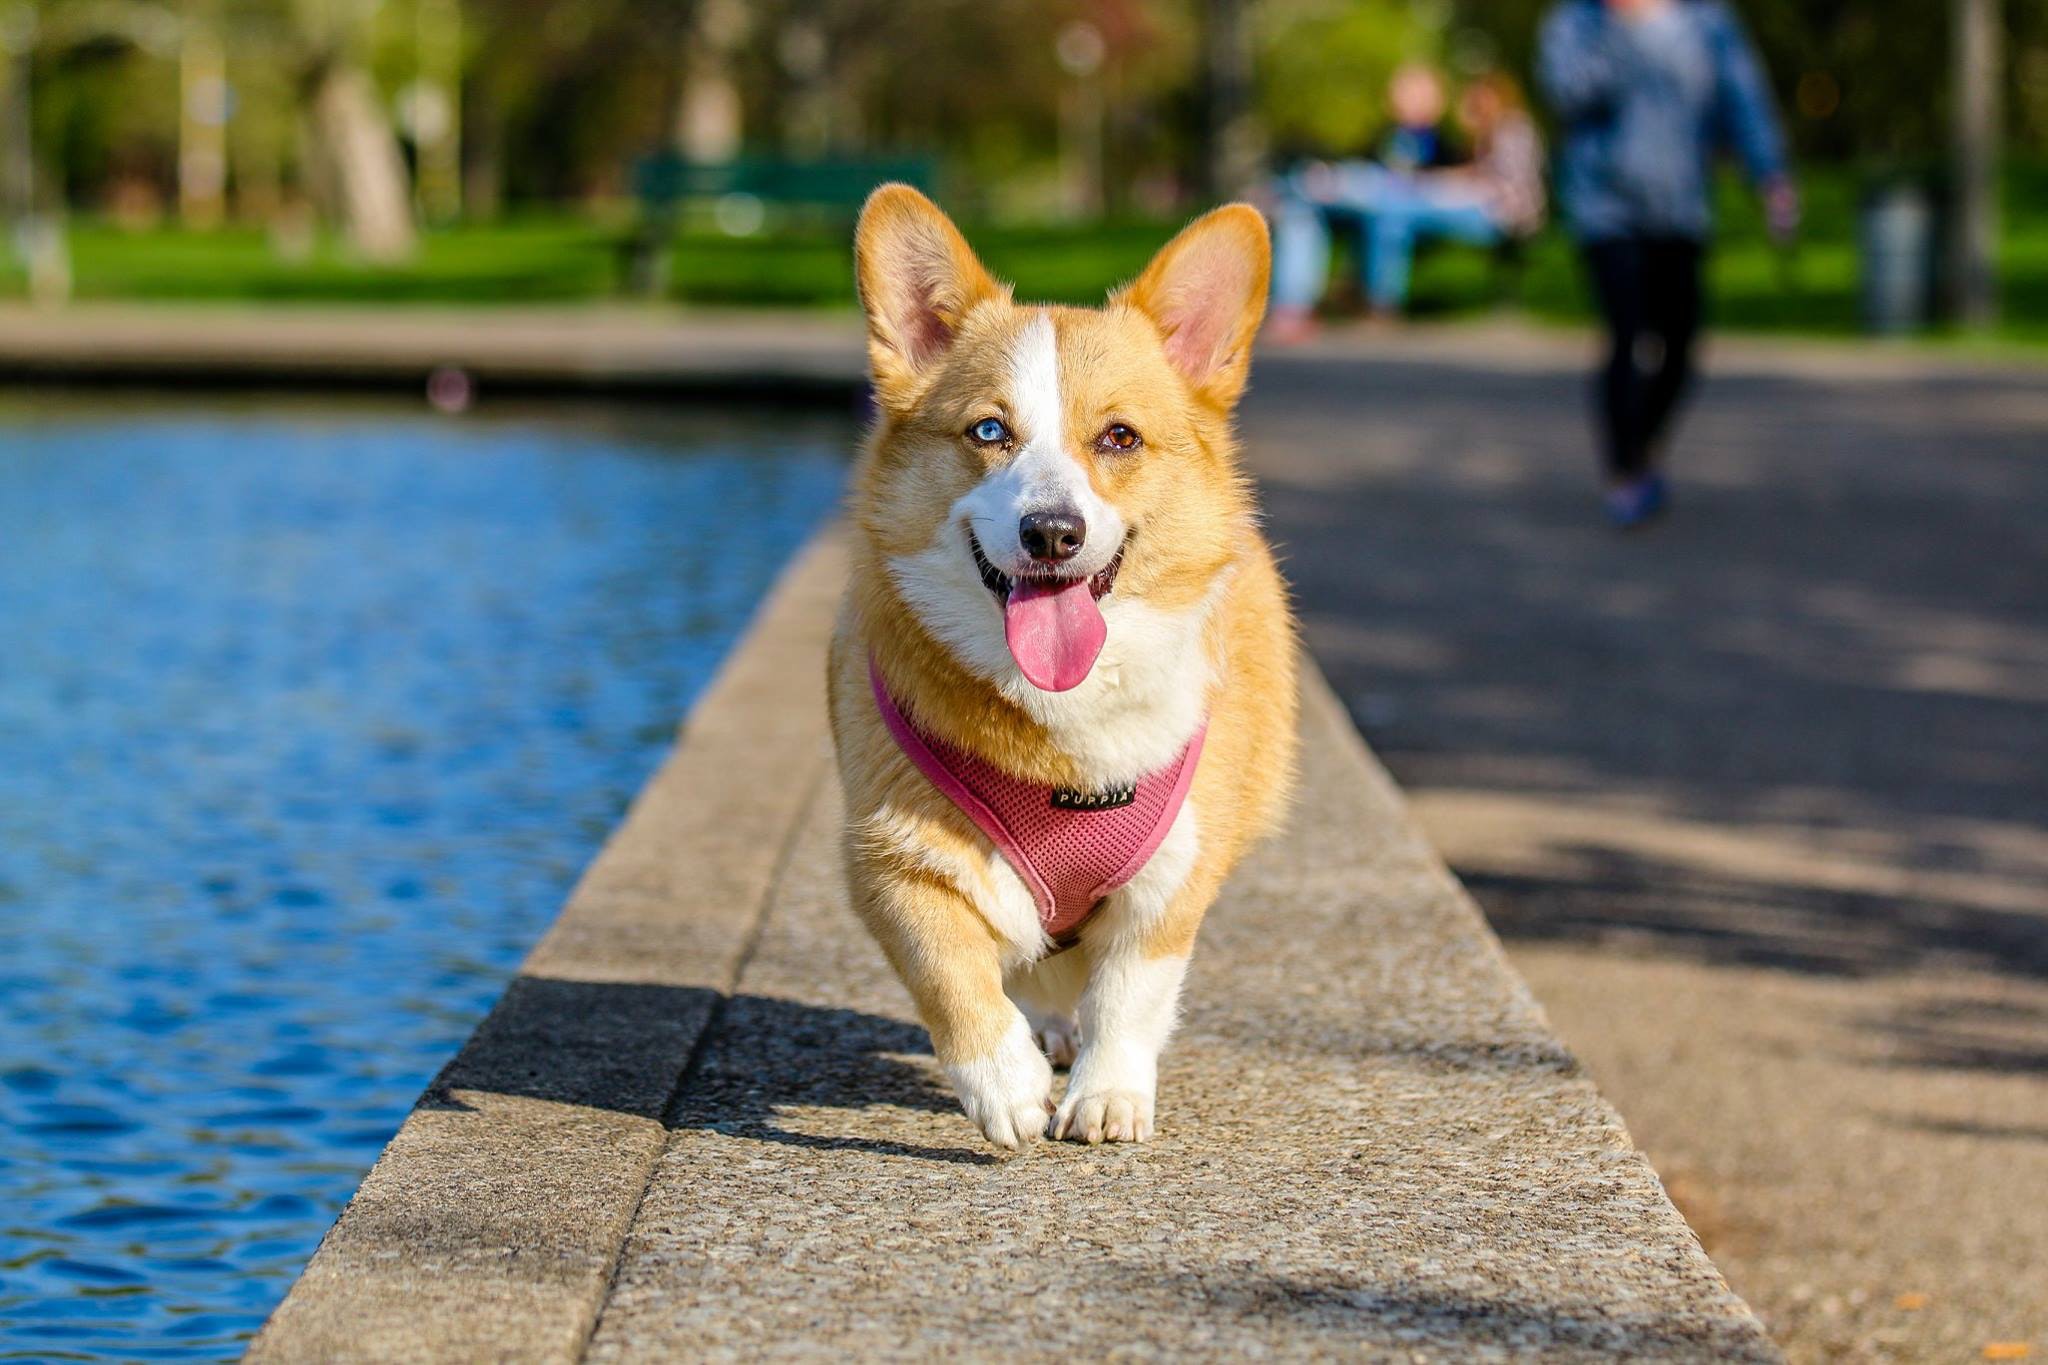 6 Effective Ways to Keep Your Dog Cool in the Summer Heat